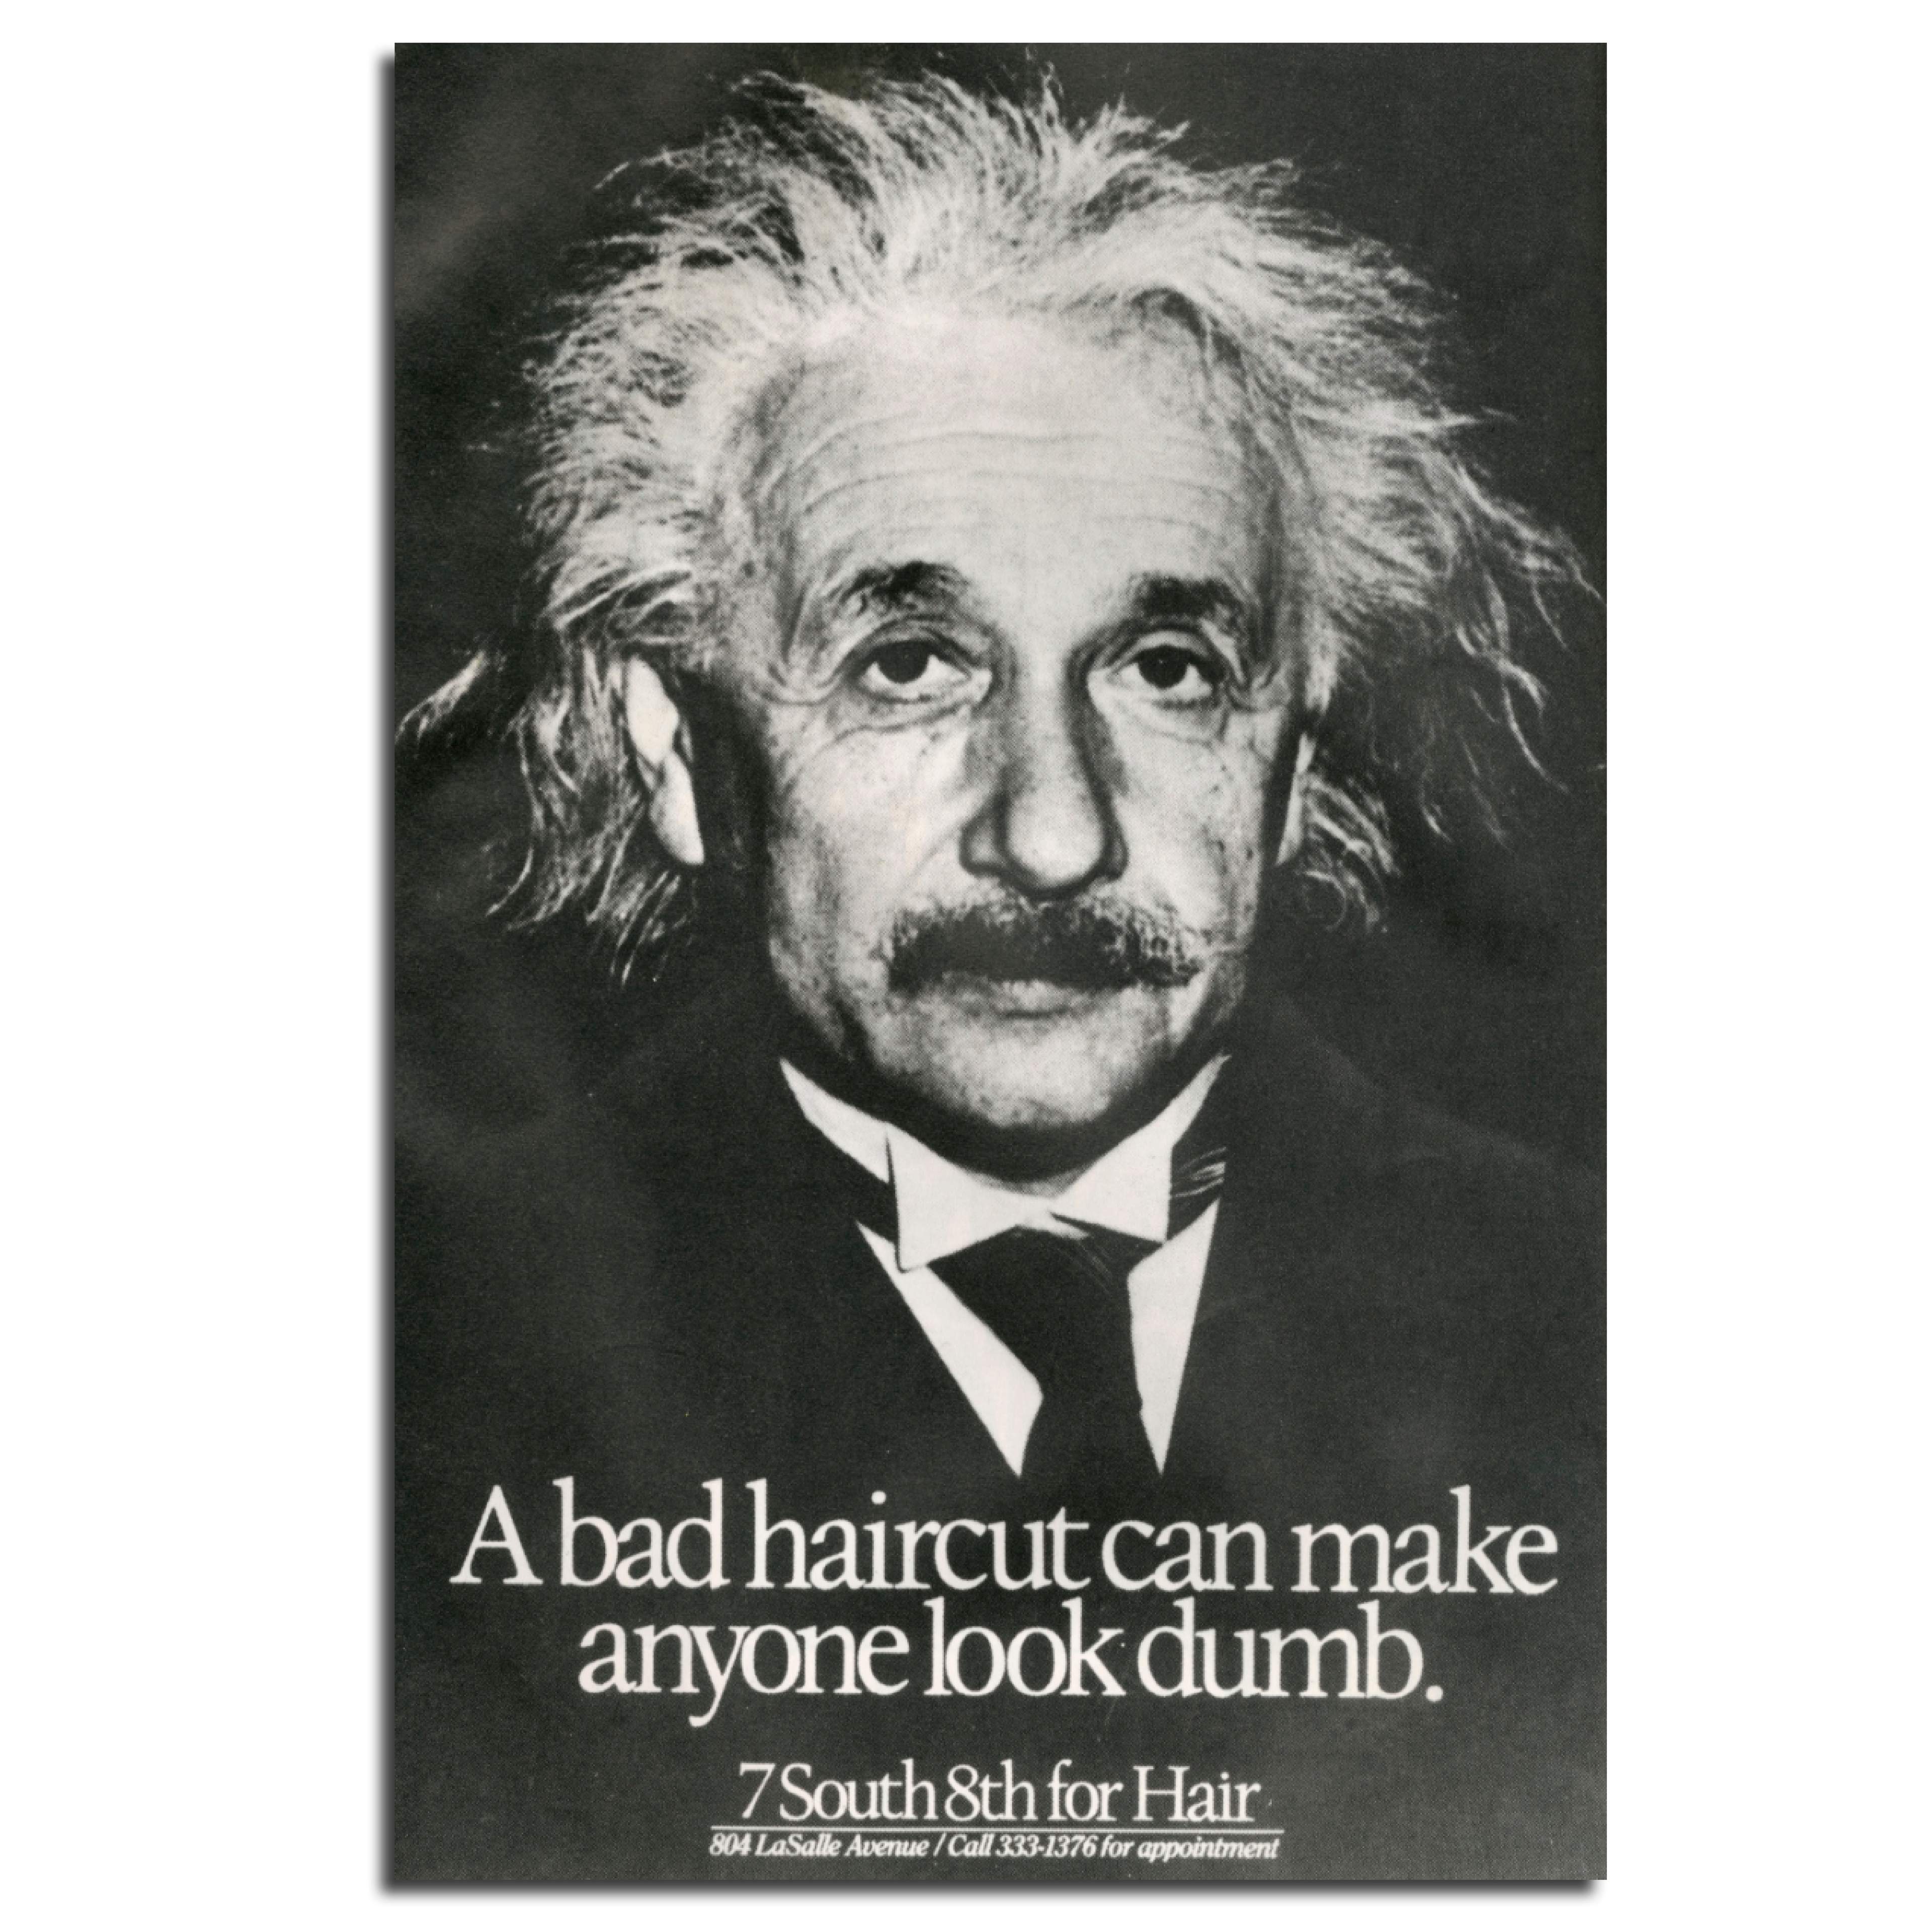 Photo of Albert Einstein with a bad haircut. Award-winning poster for a hairdresser.